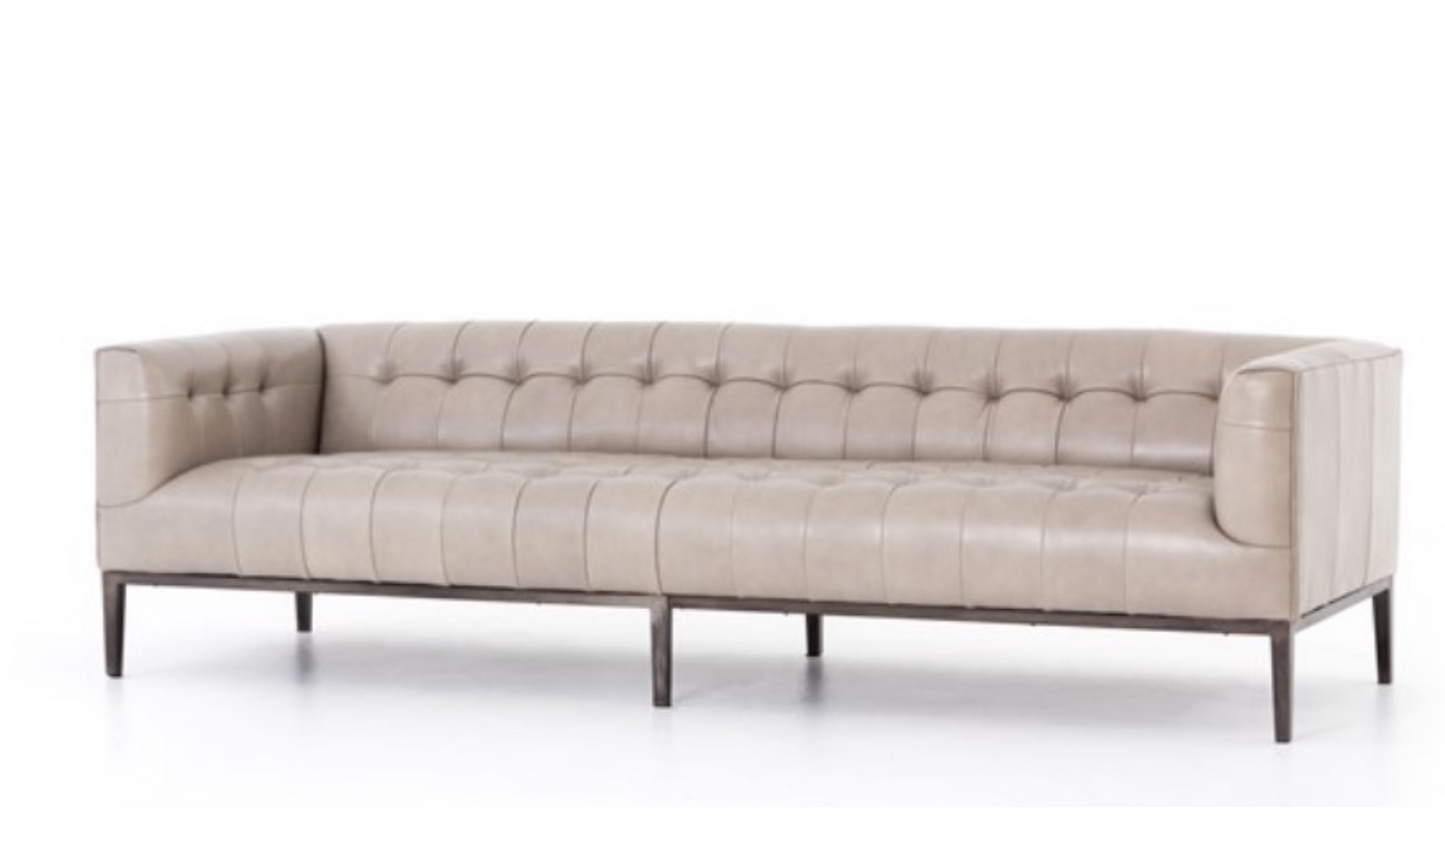 Buff colored leather sofa, squared off arms, blind tufting, gunmetal toned legs